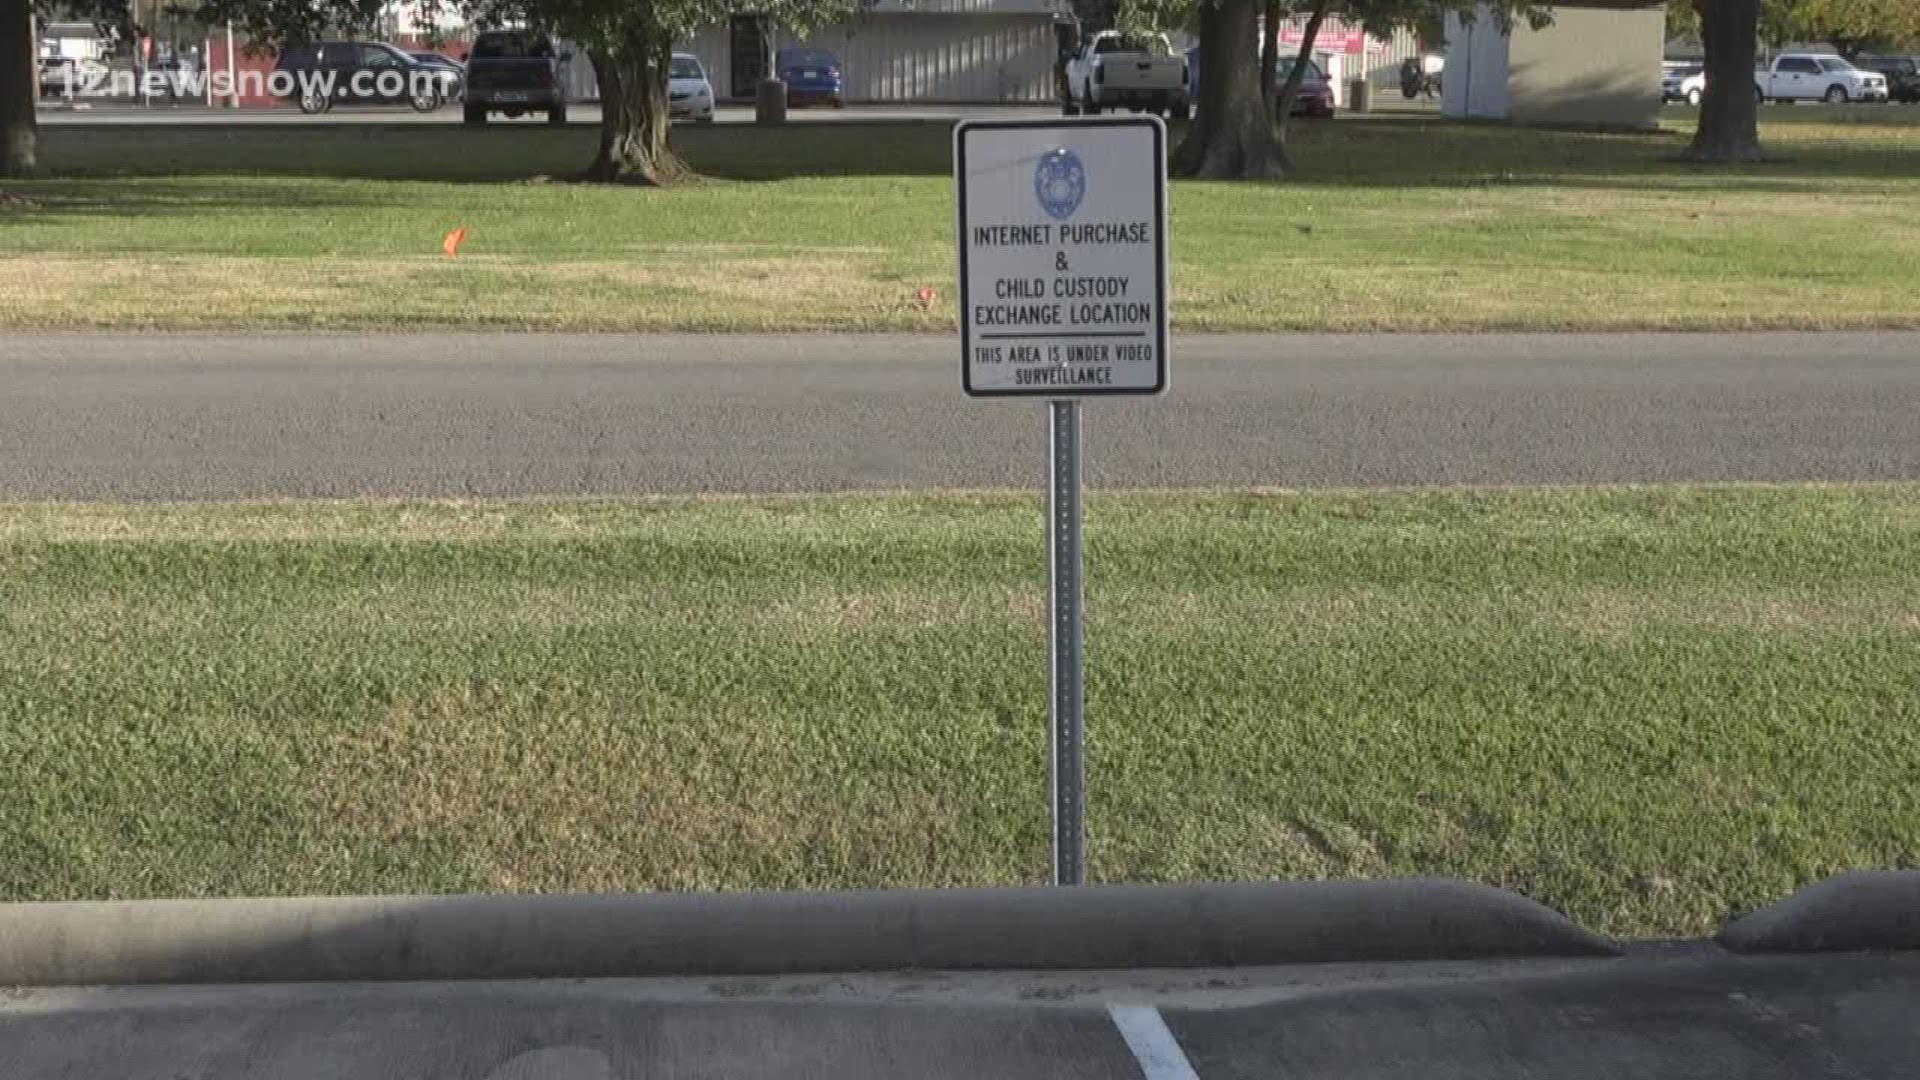 A sign outside the Groves Police Department designates an area for people to safely exchange items bought online as well as custody of children under 24/7 surveillance.